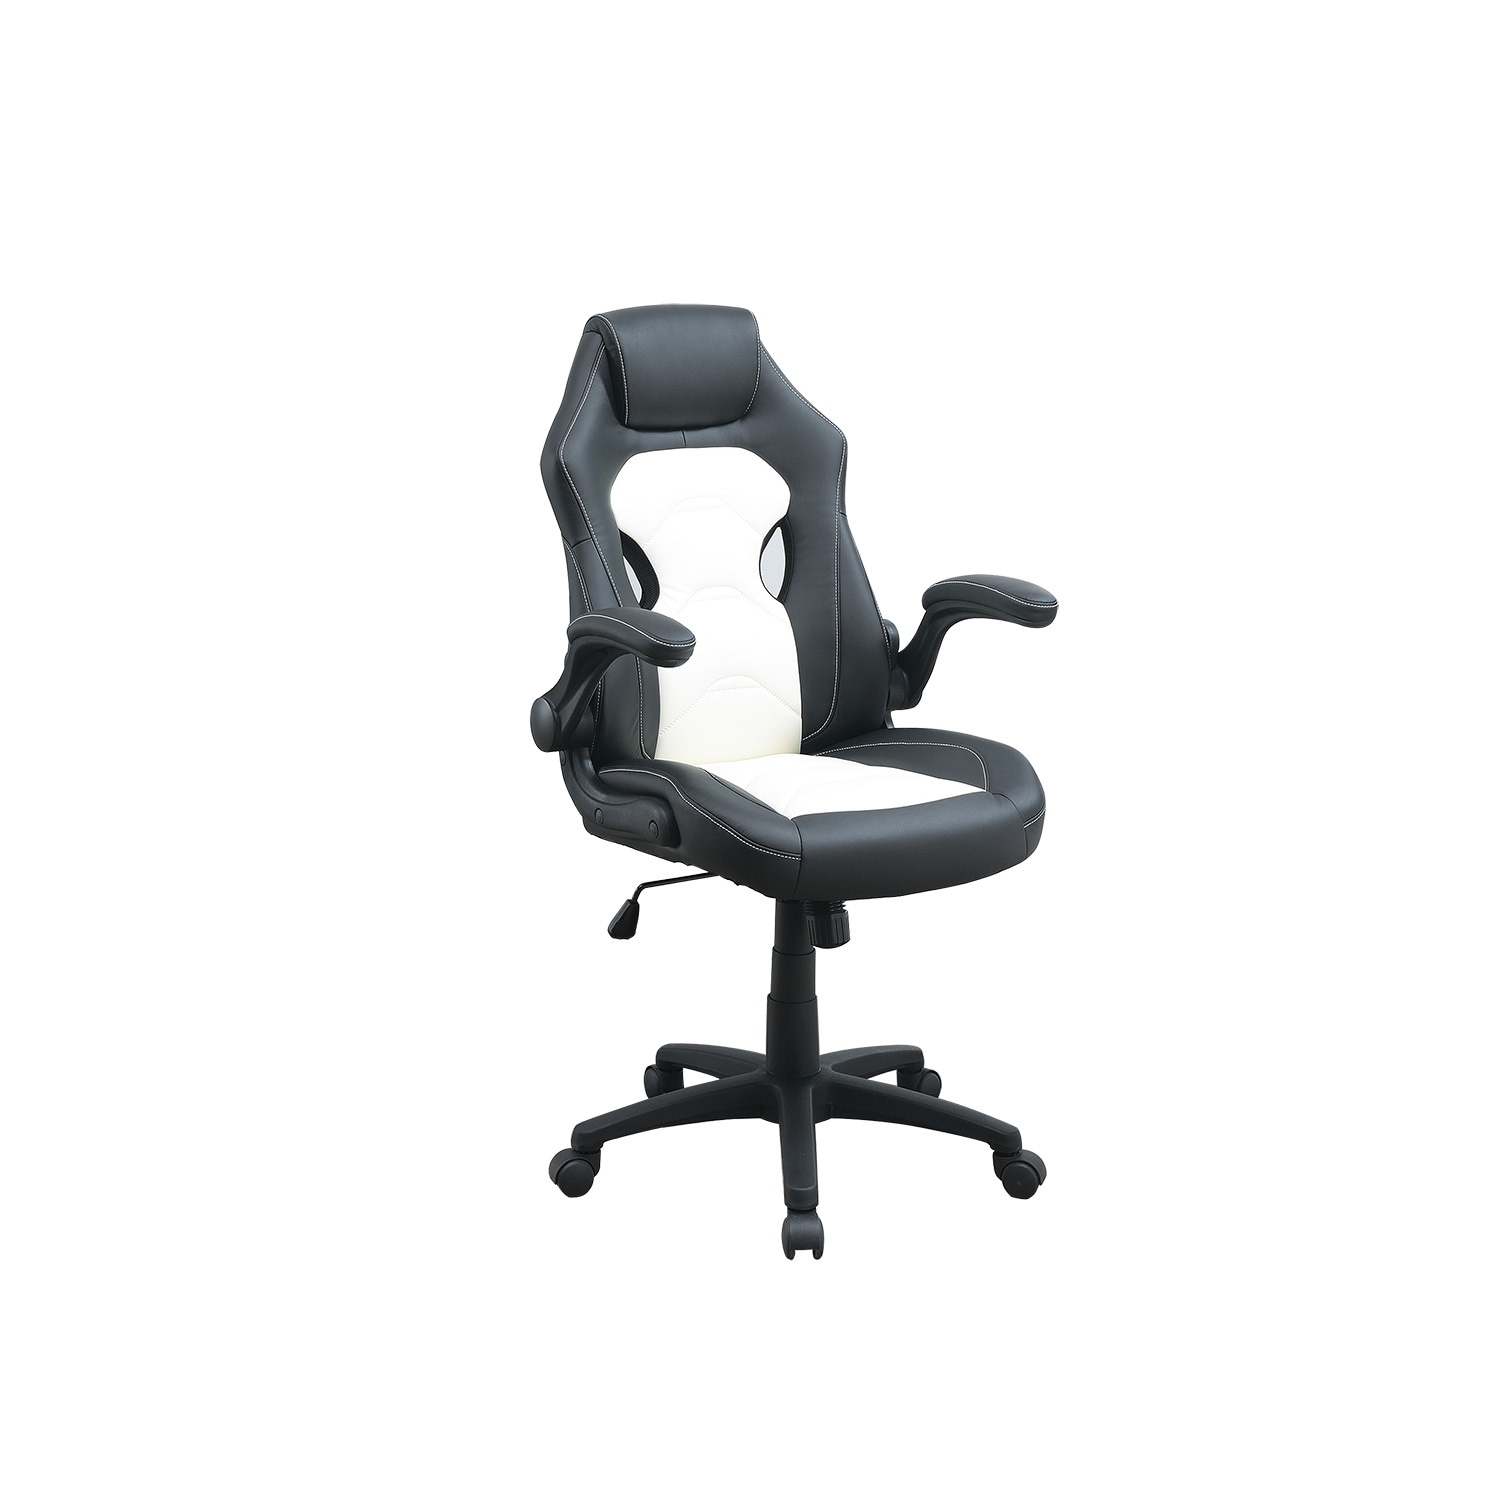 https://ak1.ostkcdn.com/images/products/is/images/direct/453cb1e077097fcd706f032823faf9644ad1ebc6/Stylish-and-Comfortable-Office-Chair-with-Pocket-Coil-Seating-and-Adjustable-Armrests-and-Seat.jpg